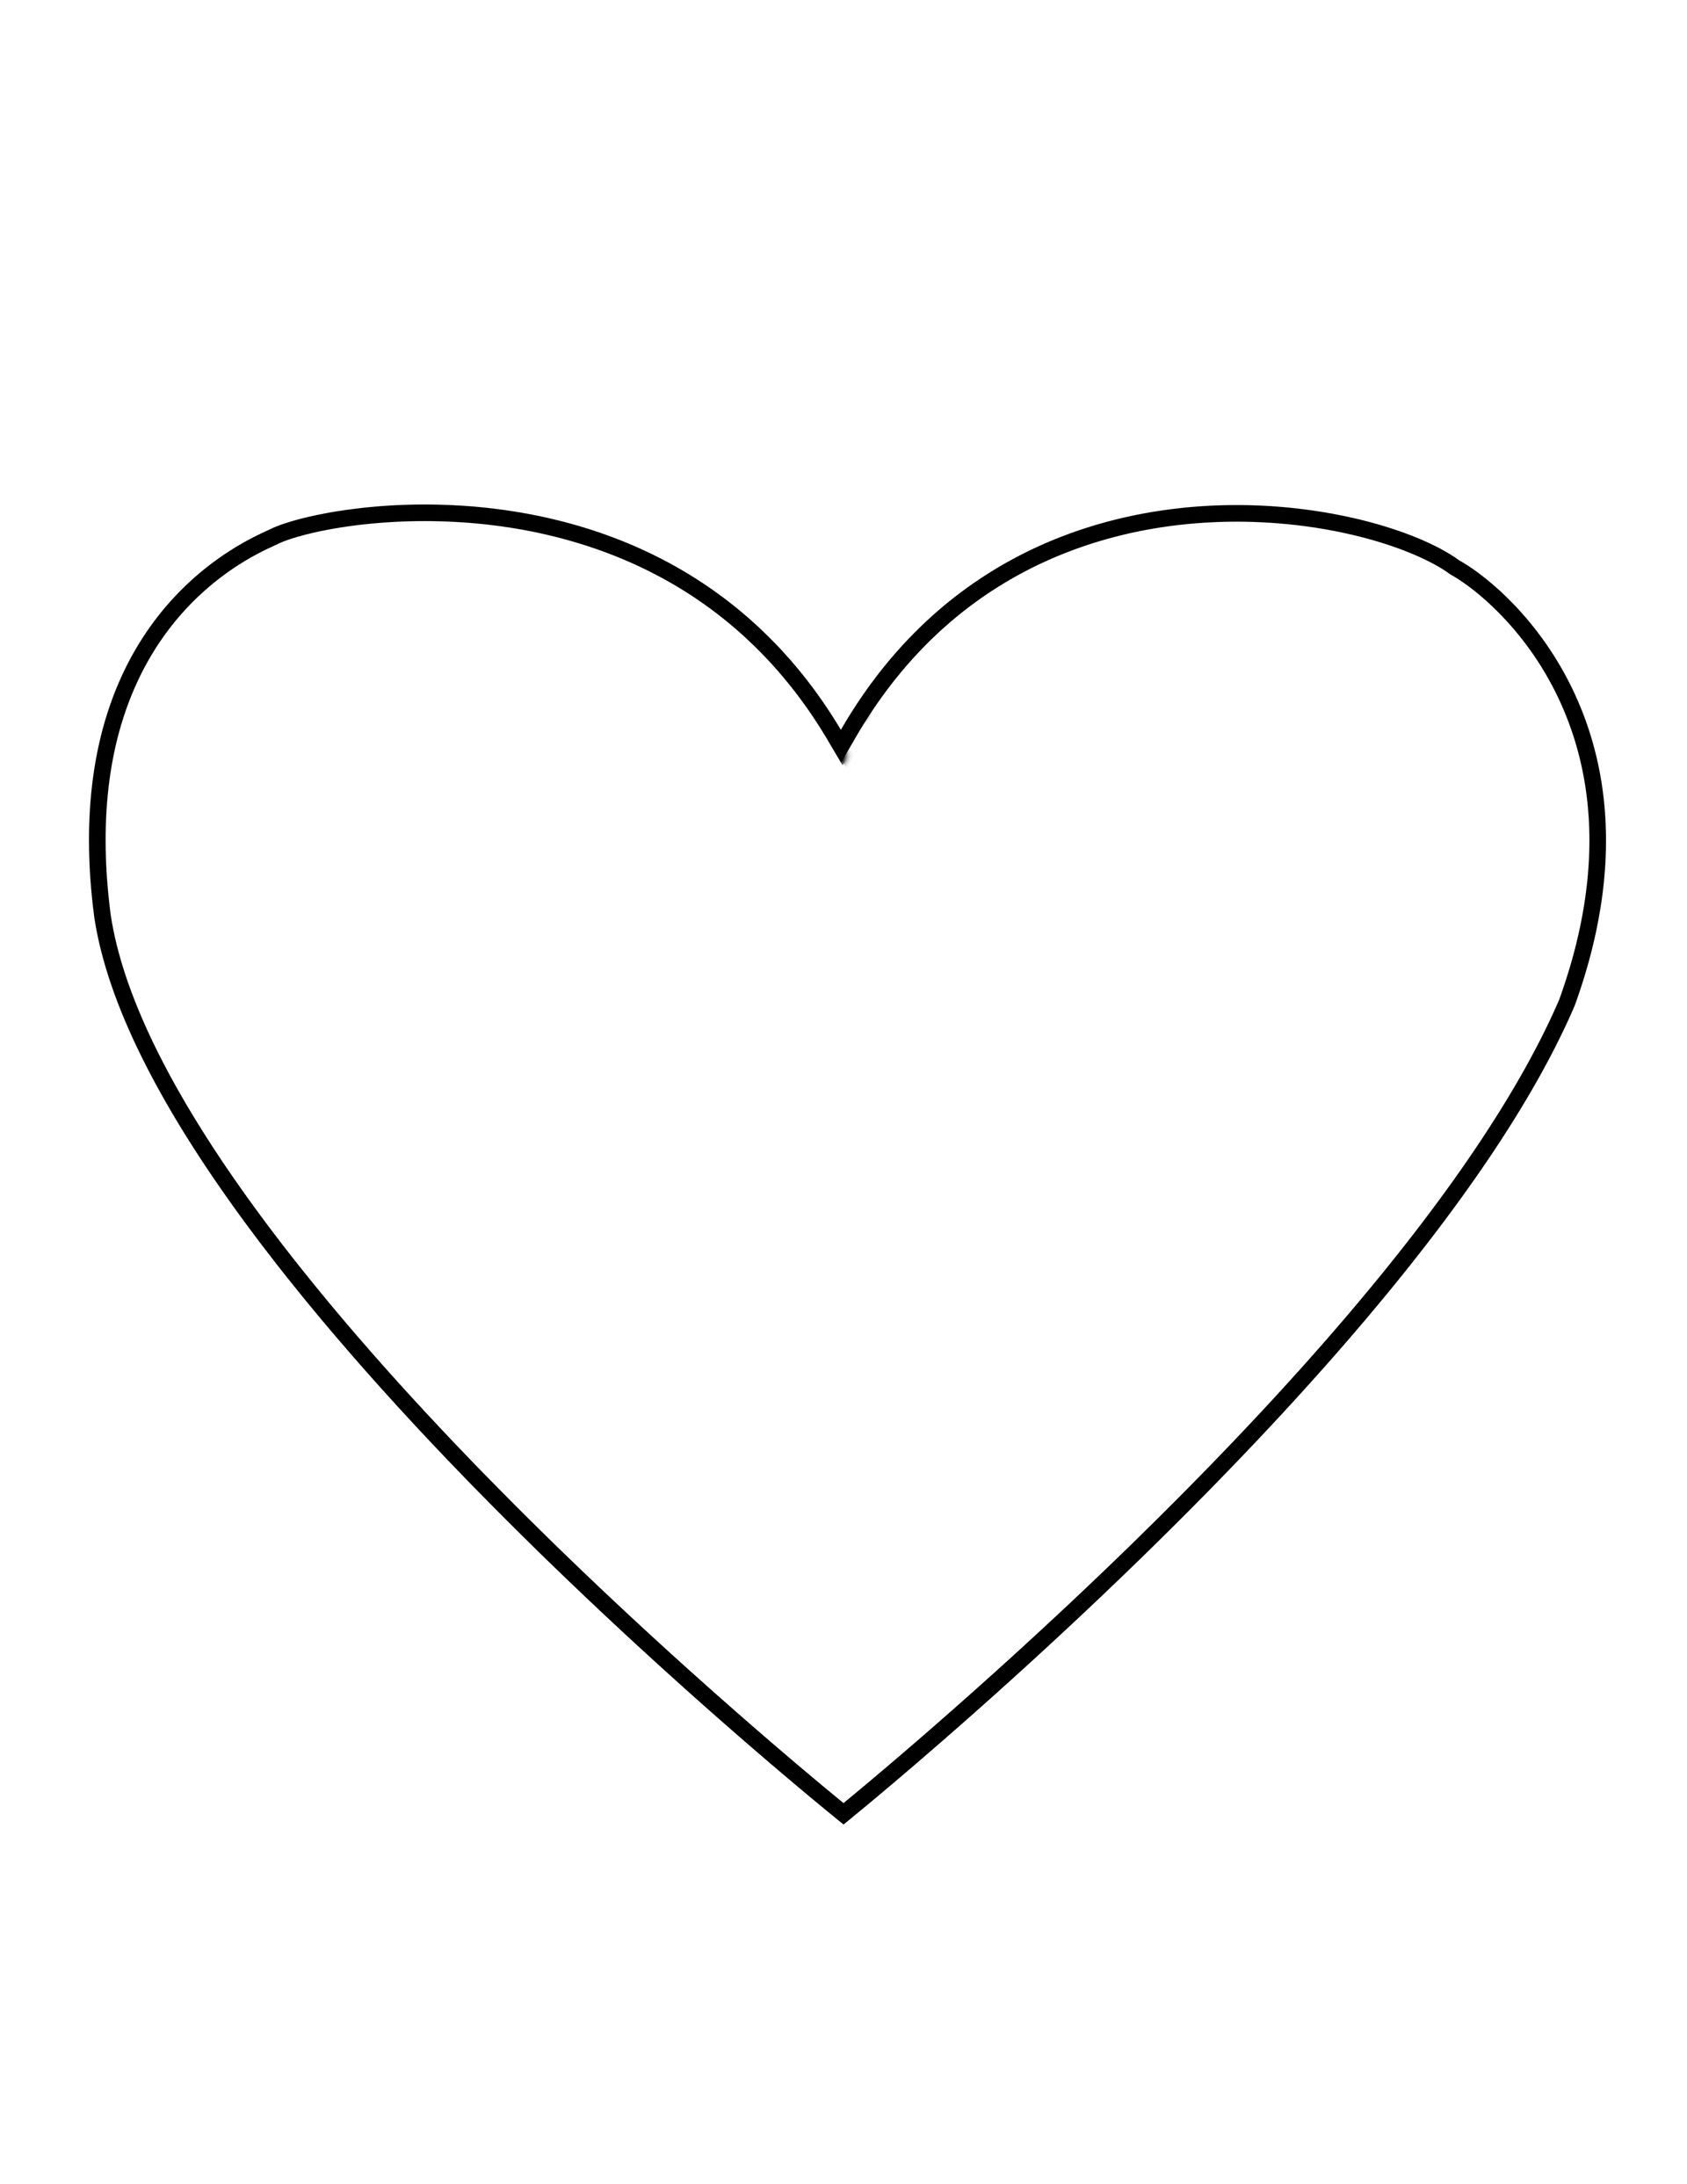 A line drawing of a heart from the nursery manual Behold Your Little Ones (2008), page 31.